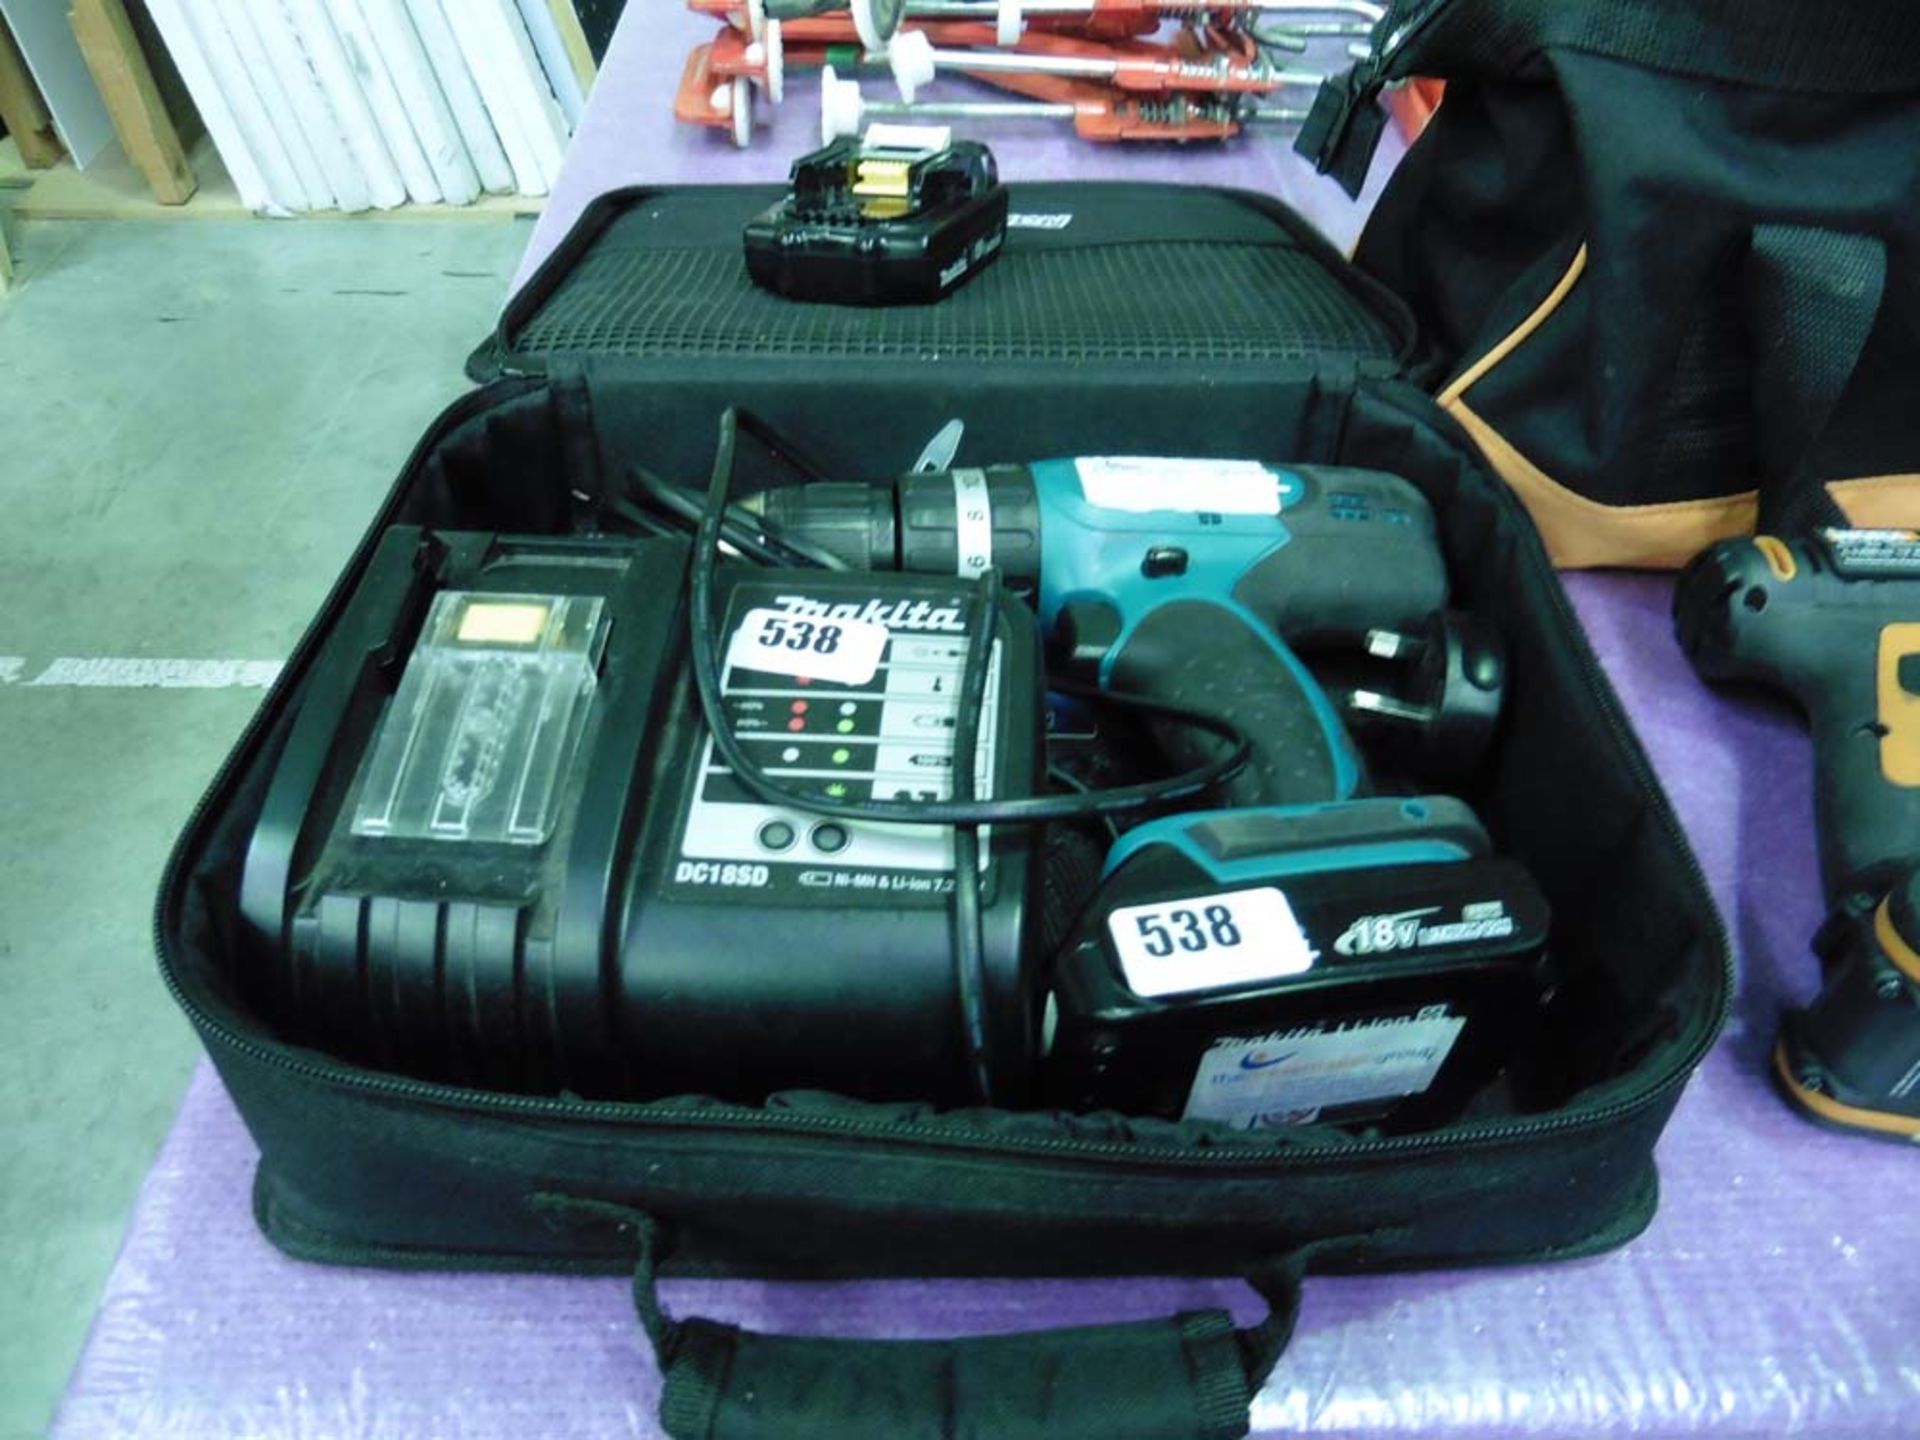 Makita lithium ion 18v battery drill with charger and case